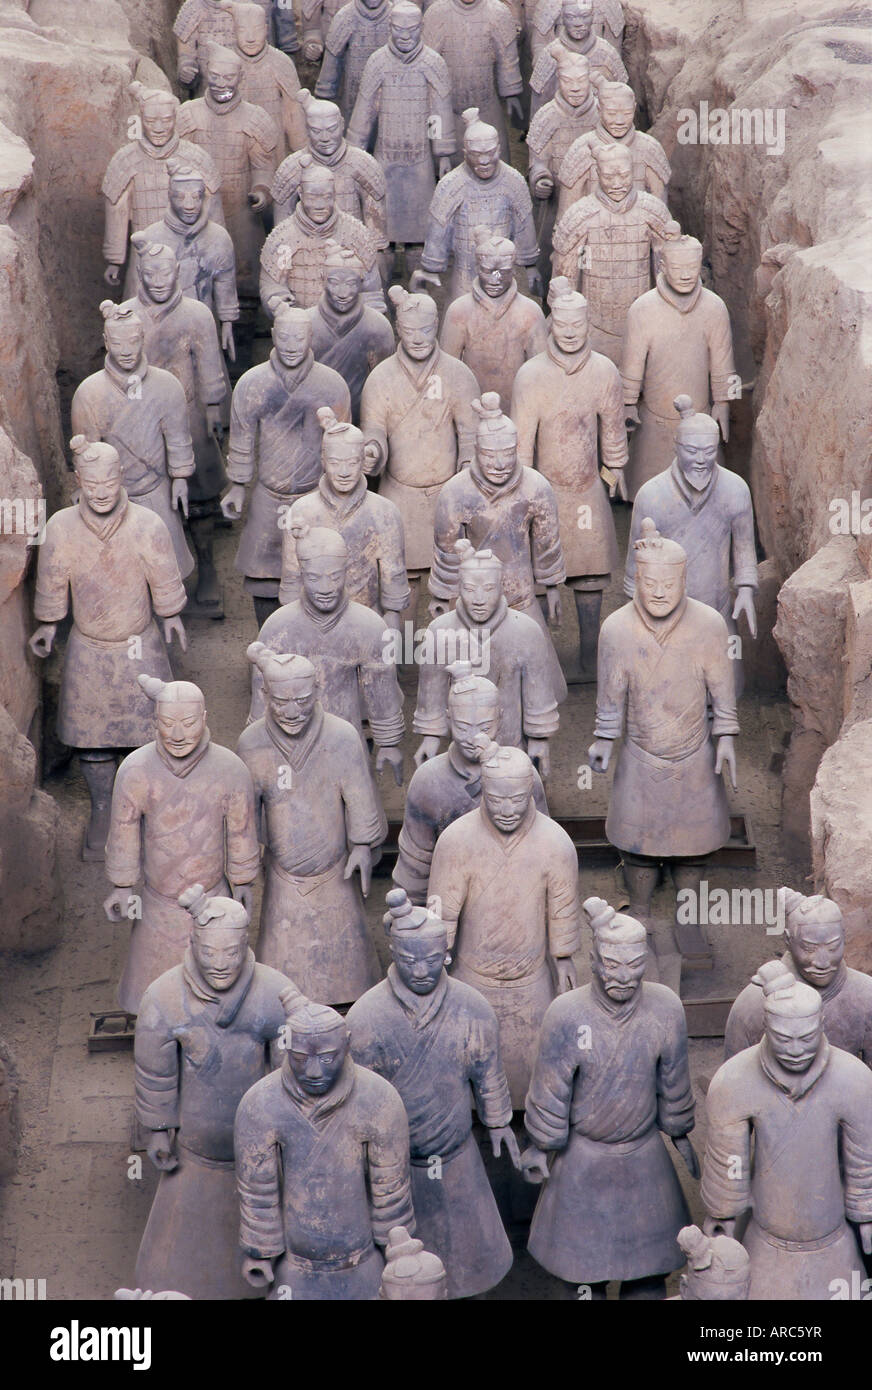 Detail of some of the six thousand statues in the Army of Terracotta Warriors, Qin Shi Huang, Xian, Shaanxi Province, China Stock Photo